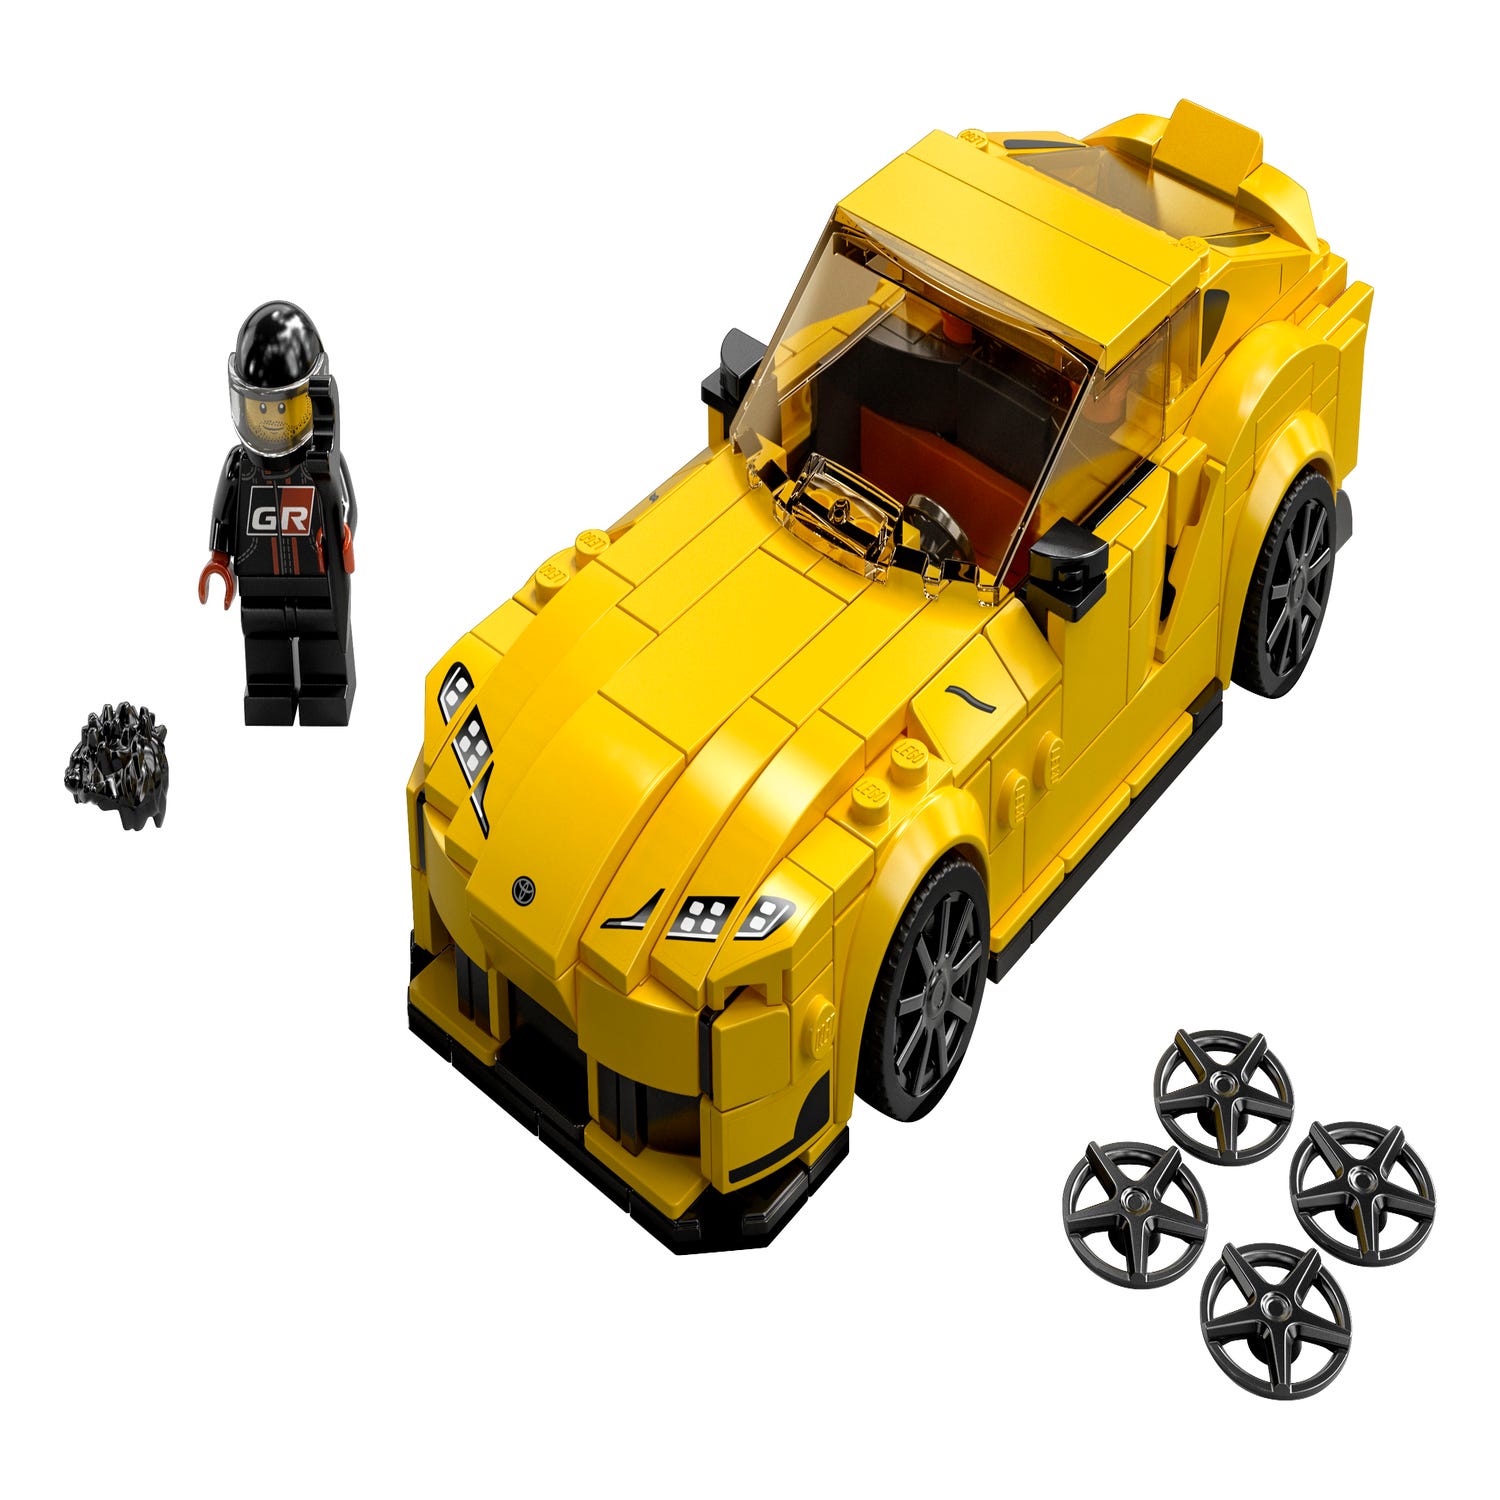 Lego Toyota Supra from Fast and Furious 